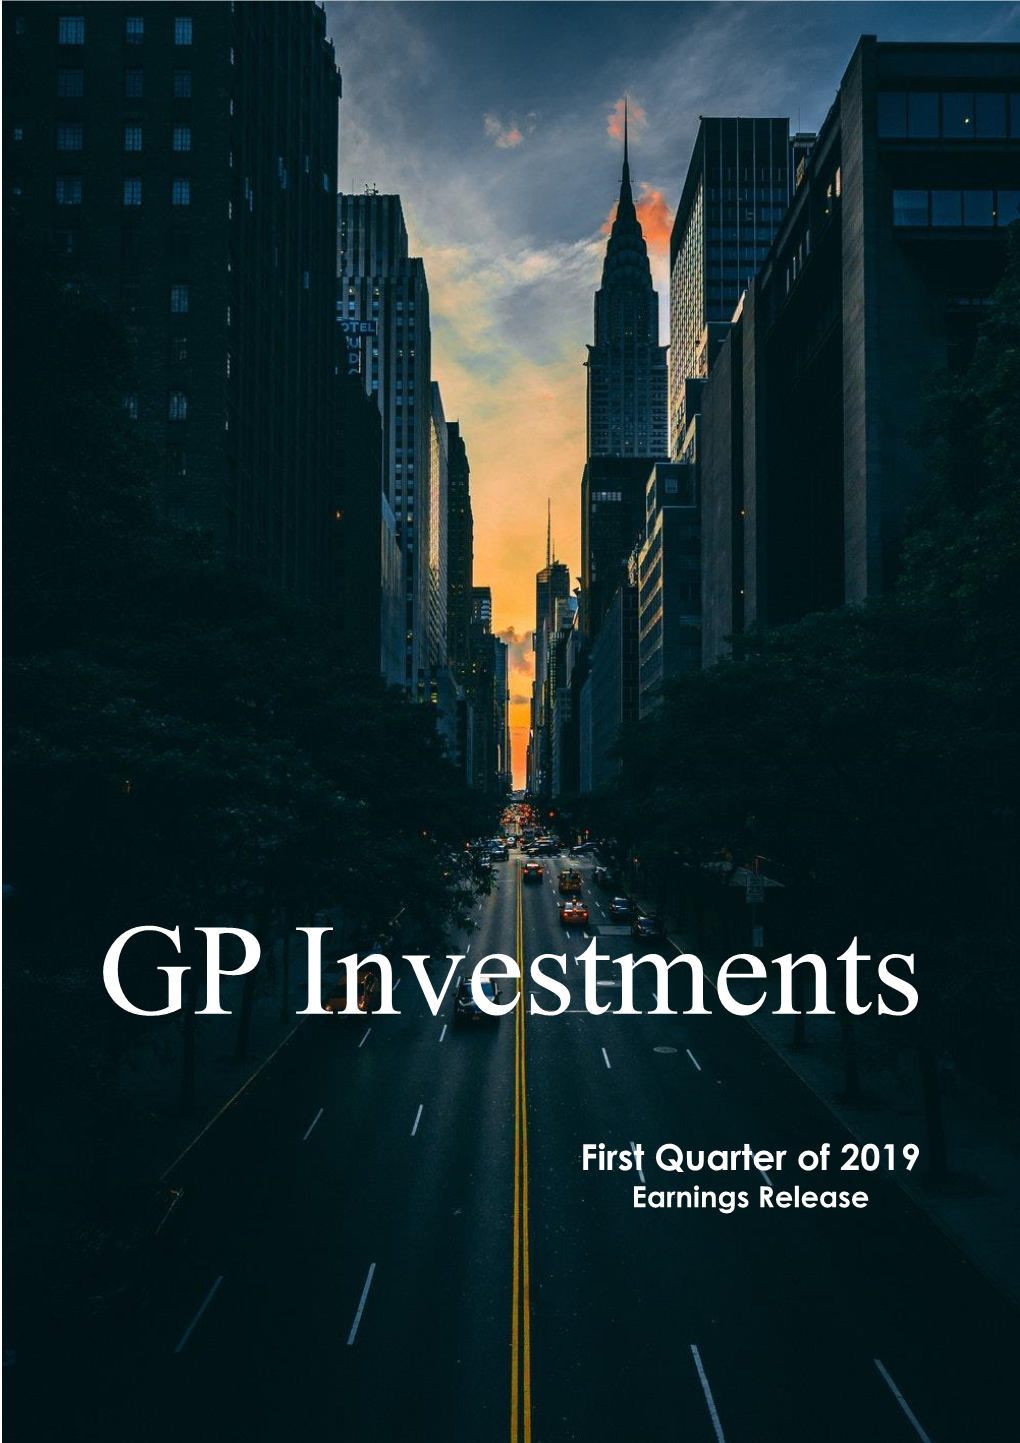 About GP Investments GP Investments Is a Leading Private Equity and Alternative Investments Firm